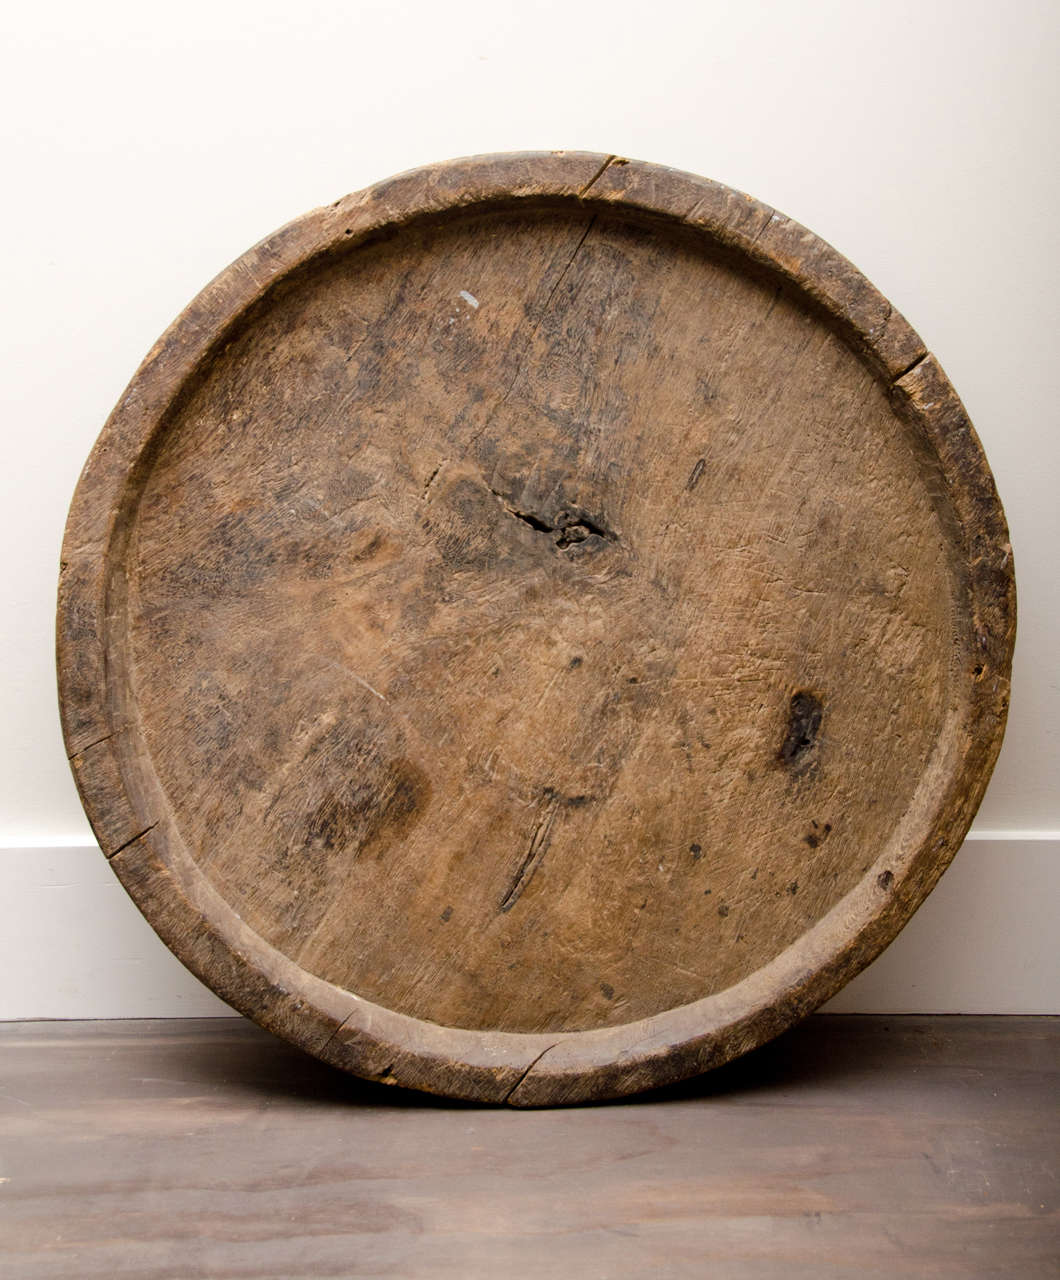 Very large hand-carved wooden platter with beautiful patina, could be great as a wall hanging or on display on a table.